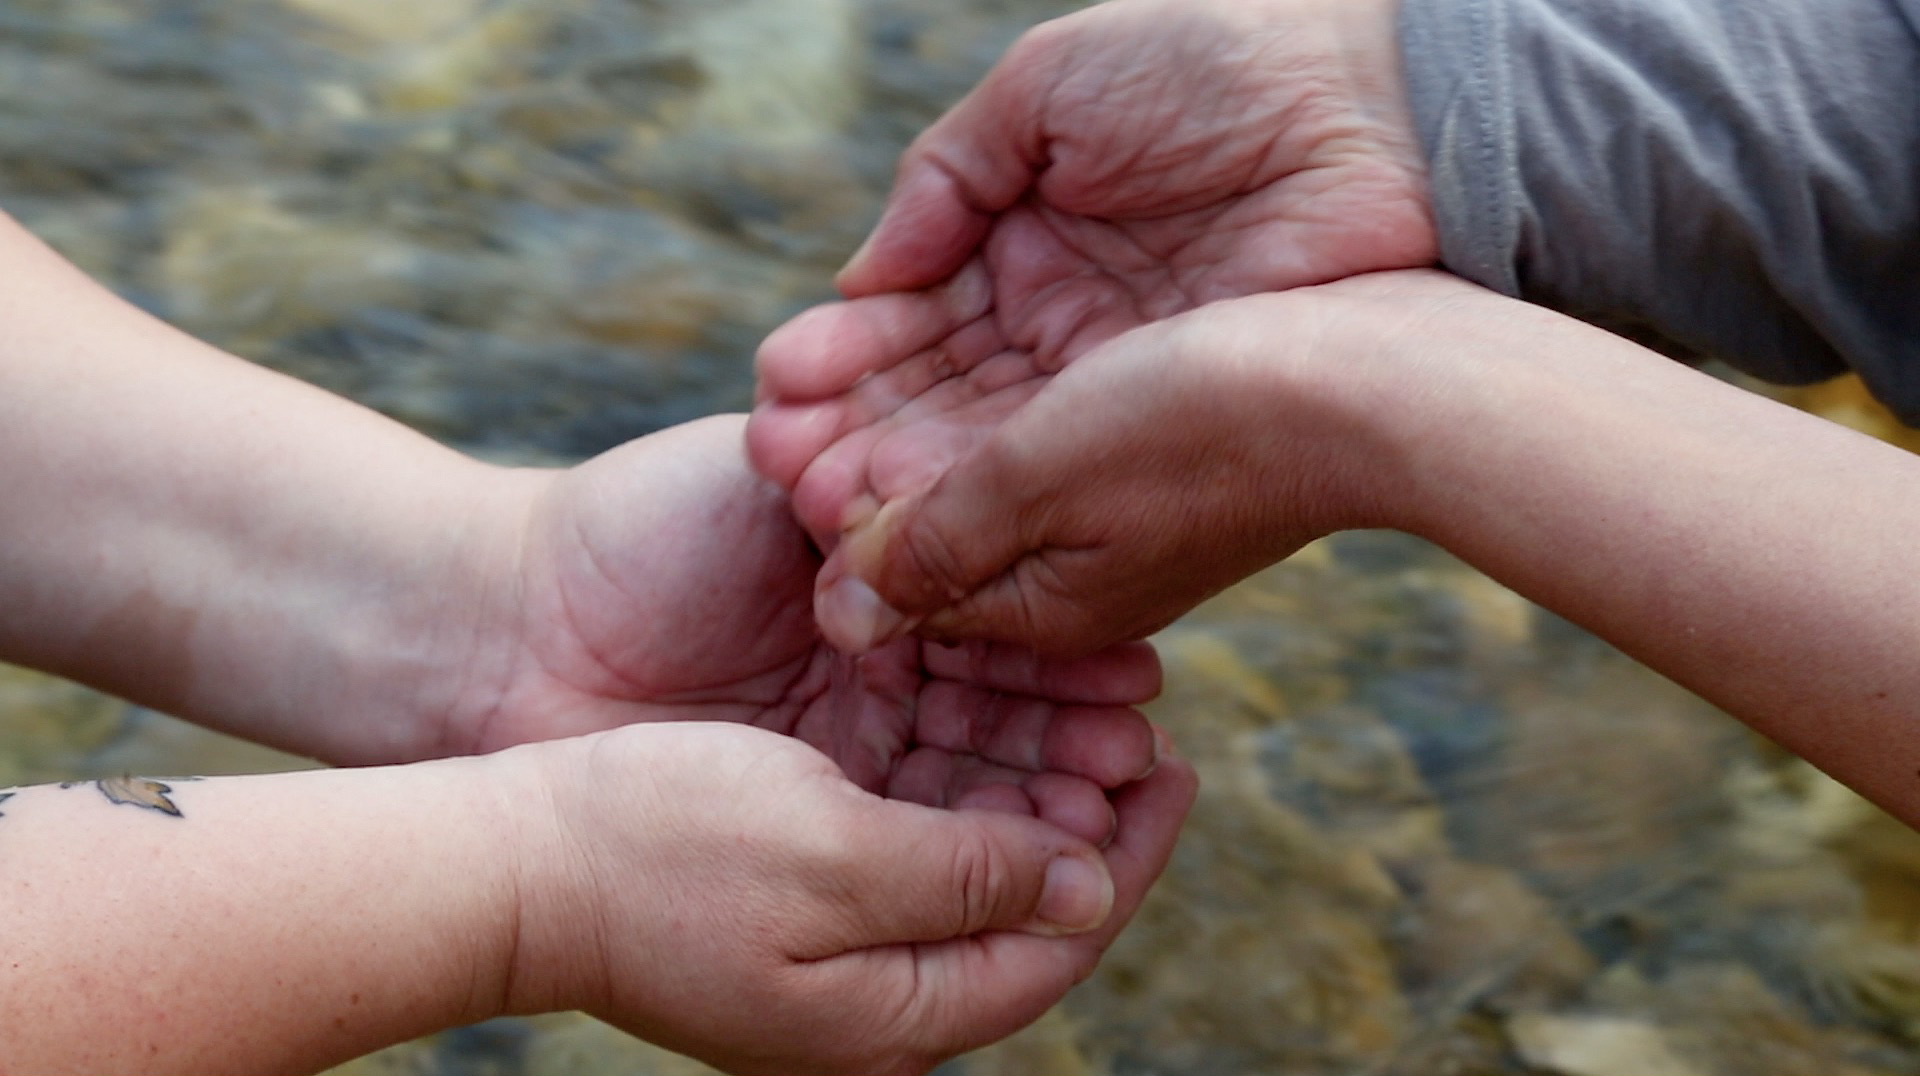 The cupped hands of two people hover over a shallow river, carefully passing river water between them.